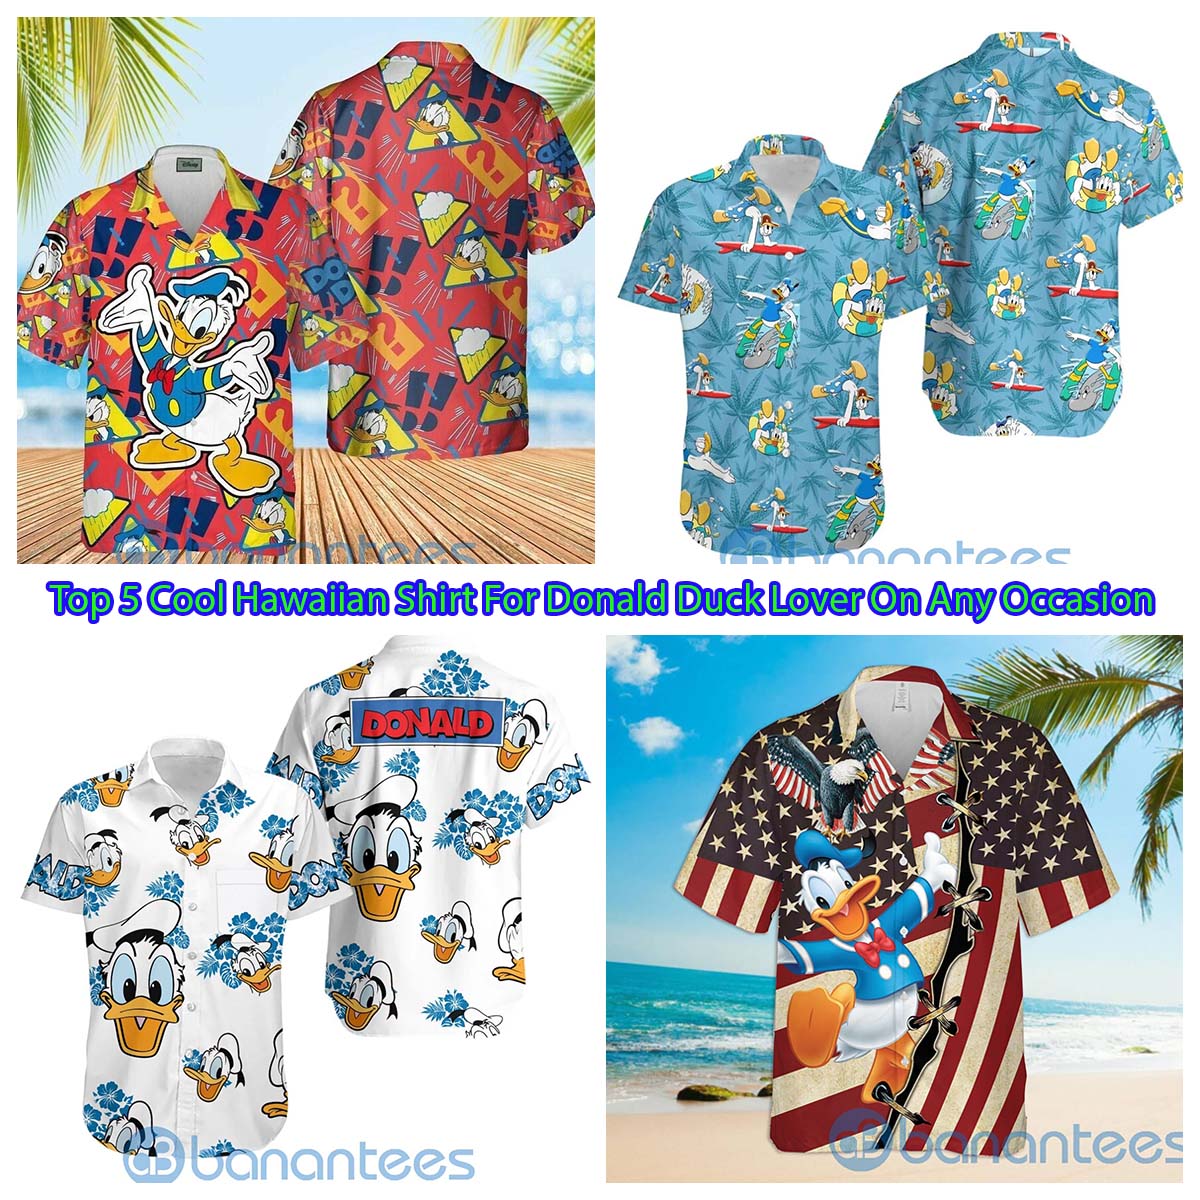 Top 5 Cool Hawaiian Shirt For Donald Duck Lover On Any Occasion